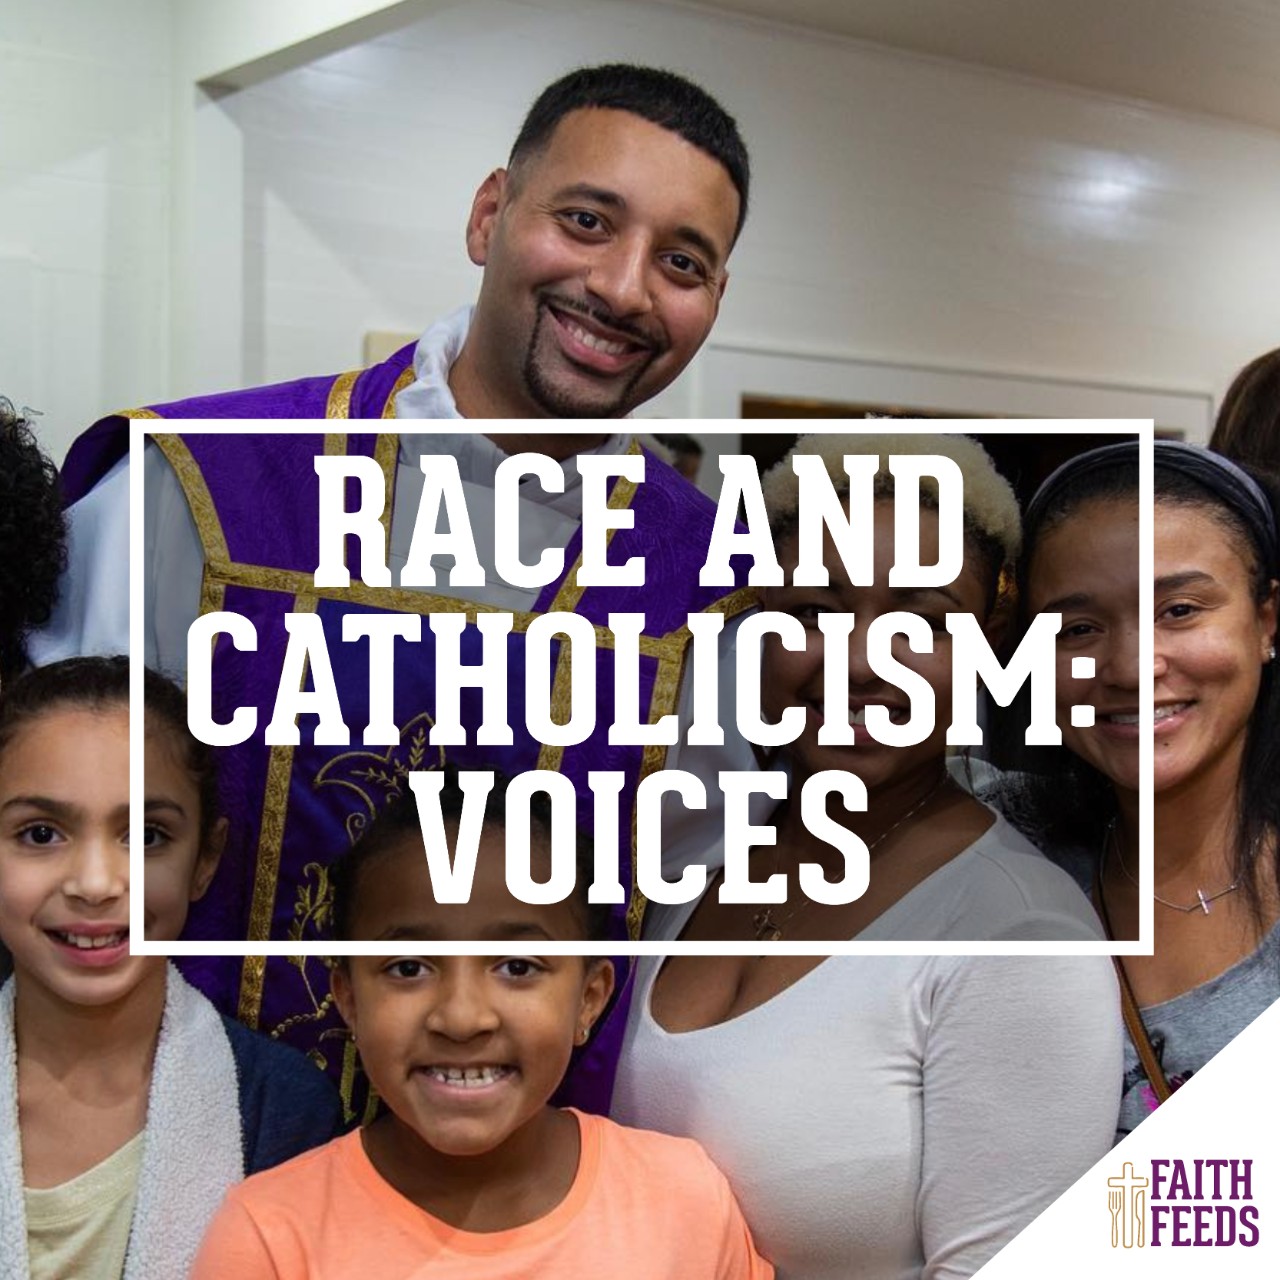 FAITH FEEDS Race and Catholicism: Perspectives